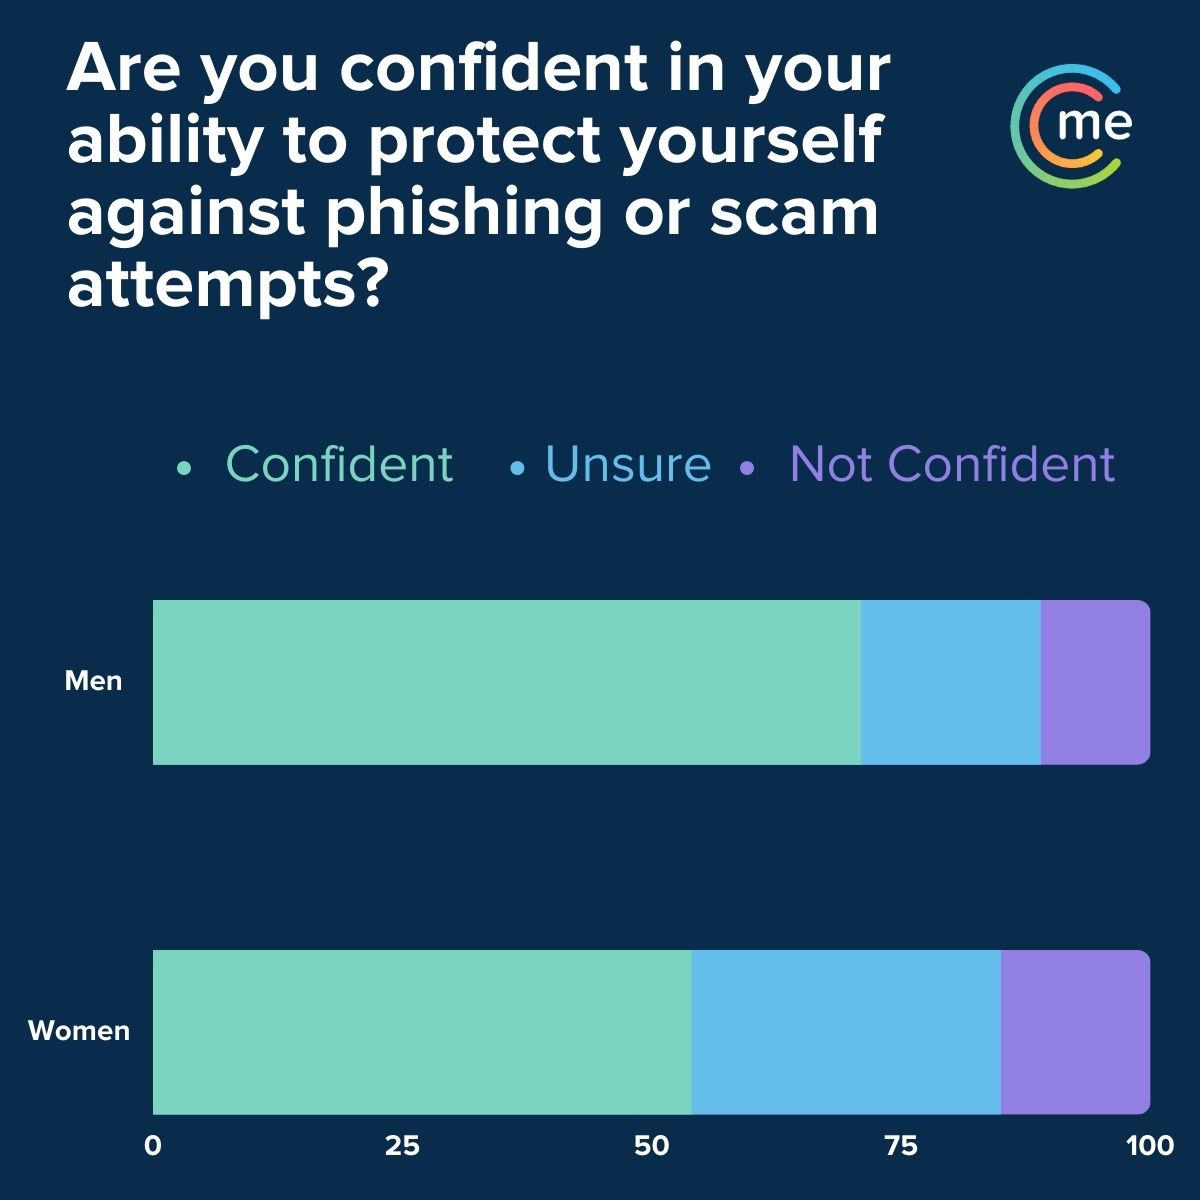 Phishing and scams